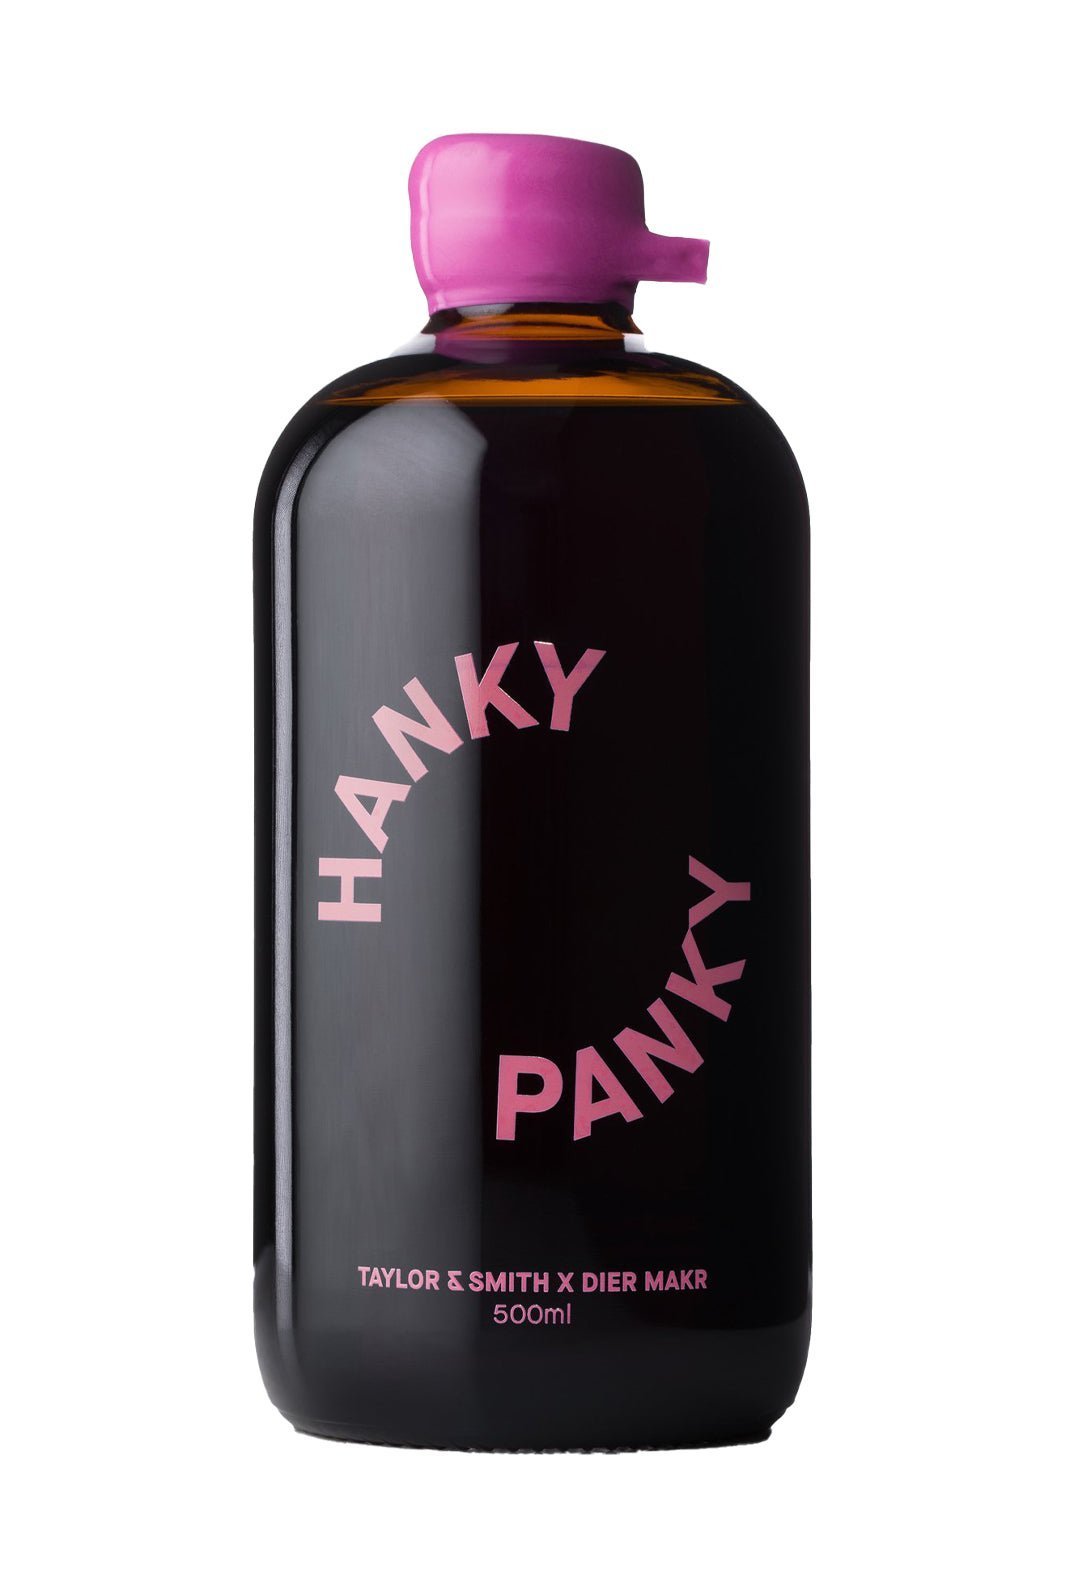 Taylor and Smith Hanky Panky 500ml - cocktail - Liquor Wine Cave